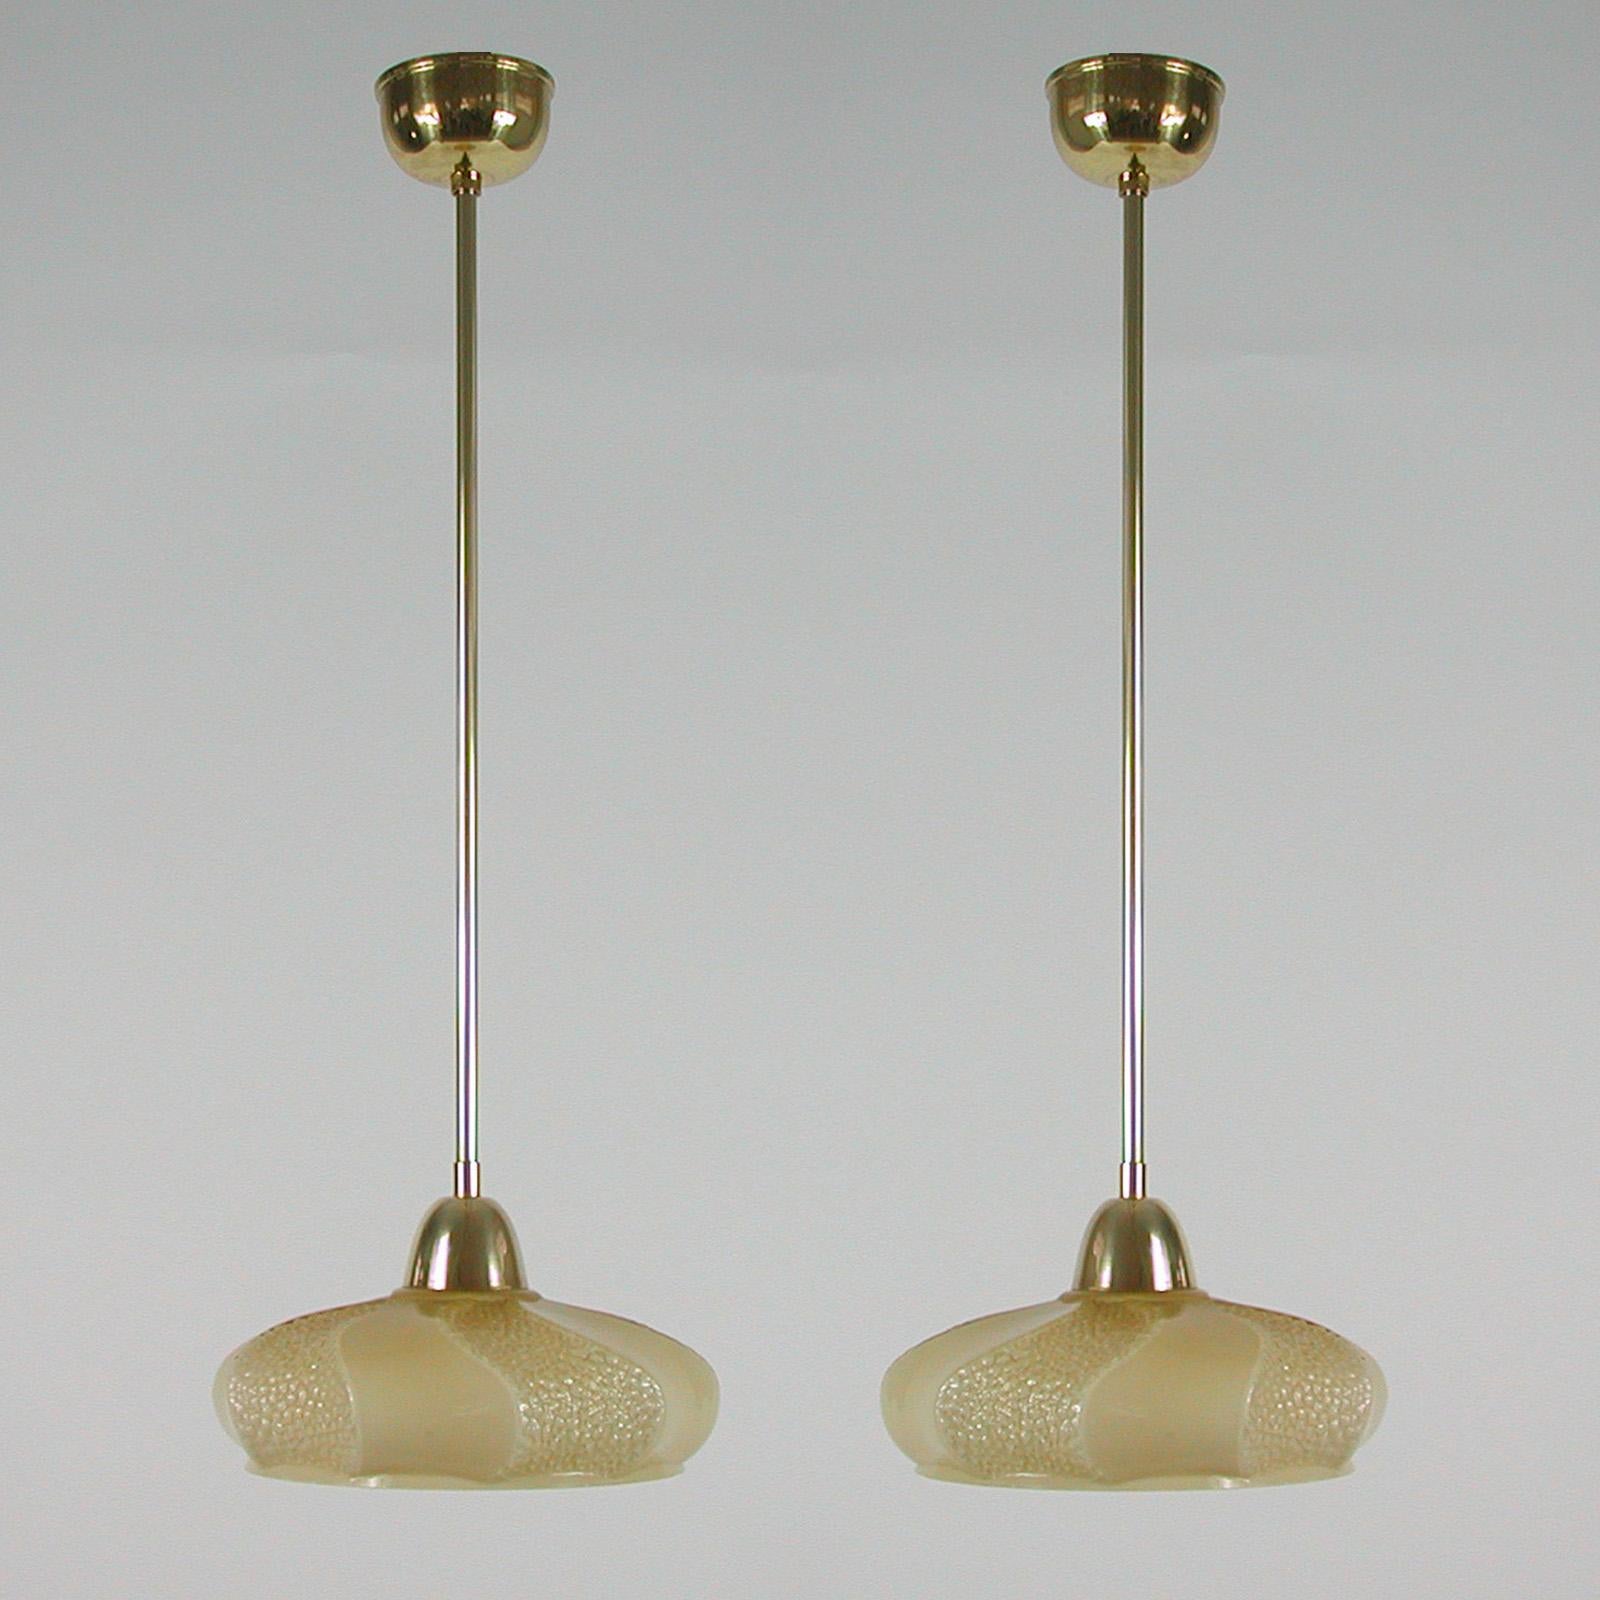 These elegant pendants were designed and manufactured in France in the 1930s to 1940s. The lights feature an ivory / cream colored opaline lamp shade and brass hardware.

Good vintage condition with one original E14 socket. 

The lamps have been